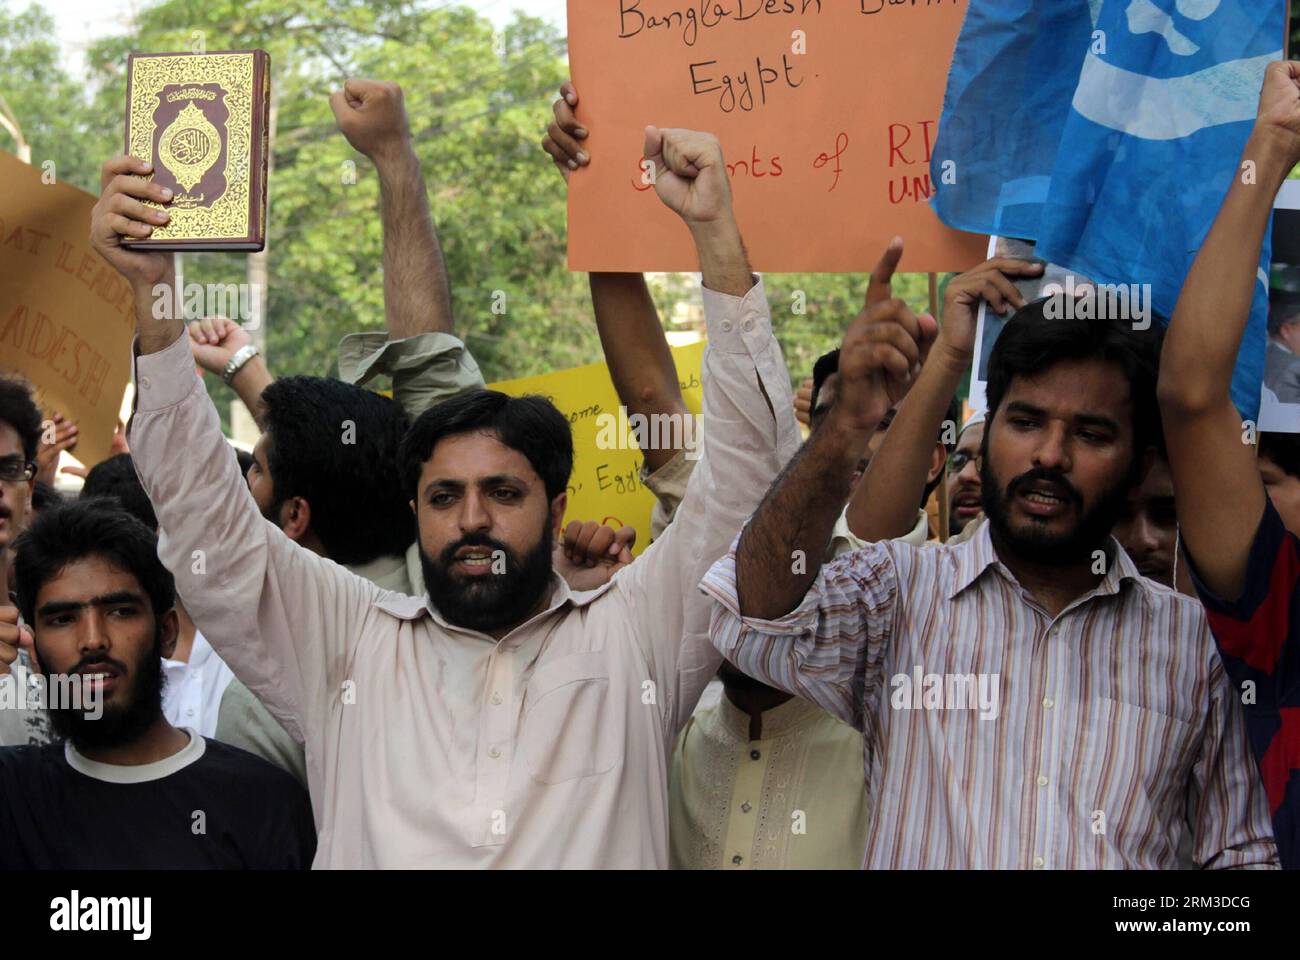 Bildnummer: 60154754  Datum: 18.07.2013  Copyright: imago/Xinhua (130718) -- LAHORE, July 18, 2013 (Xinhua) -- Pakistani activists of Islami Jamiat-e-Tulaba (IJT), a student wing of political party Jamaat-e-Islami (JI), shout slogans against the sentence of Bangladeshi JI leader Ghulam Azam during a protest in eastern Pakistan s Lahore on July 18, 2013. Jamaat-e-Islami (JI) staged demonstrations to mark its protest against the 90-year sentence to its former Amir Professor Ghulam Azam in Bangladesh for his alleged involvement in 1971 war crimes. (Xinhua/Jamil Ahmed) PAKISTAN-LAHORE-PROTEST PUBL Stock Photo